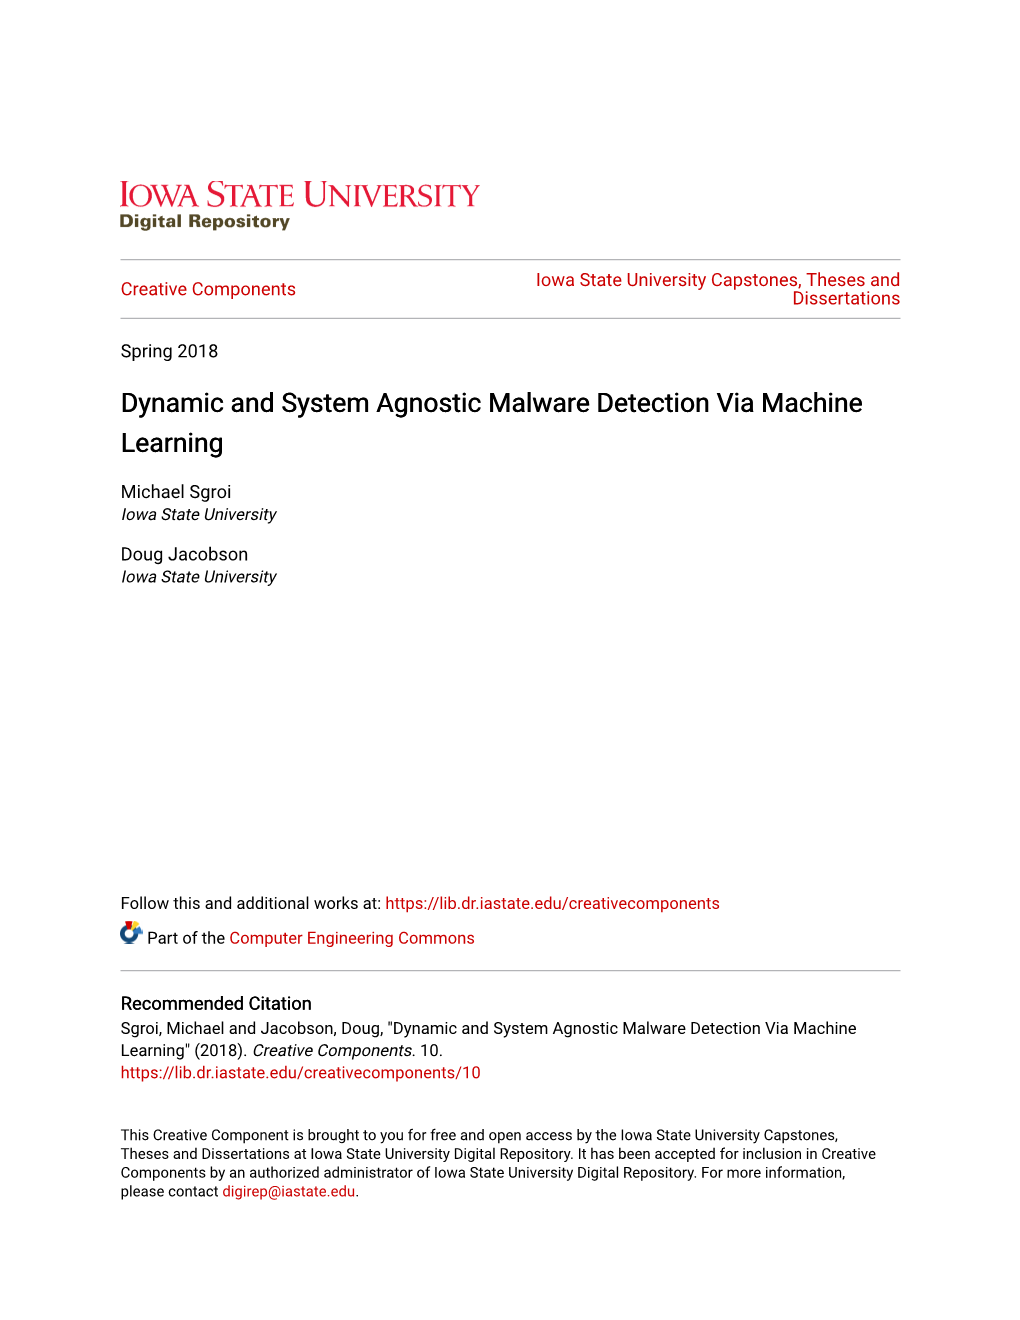 Dynamic and System Agnostic Malware Detection Via Machine Learning